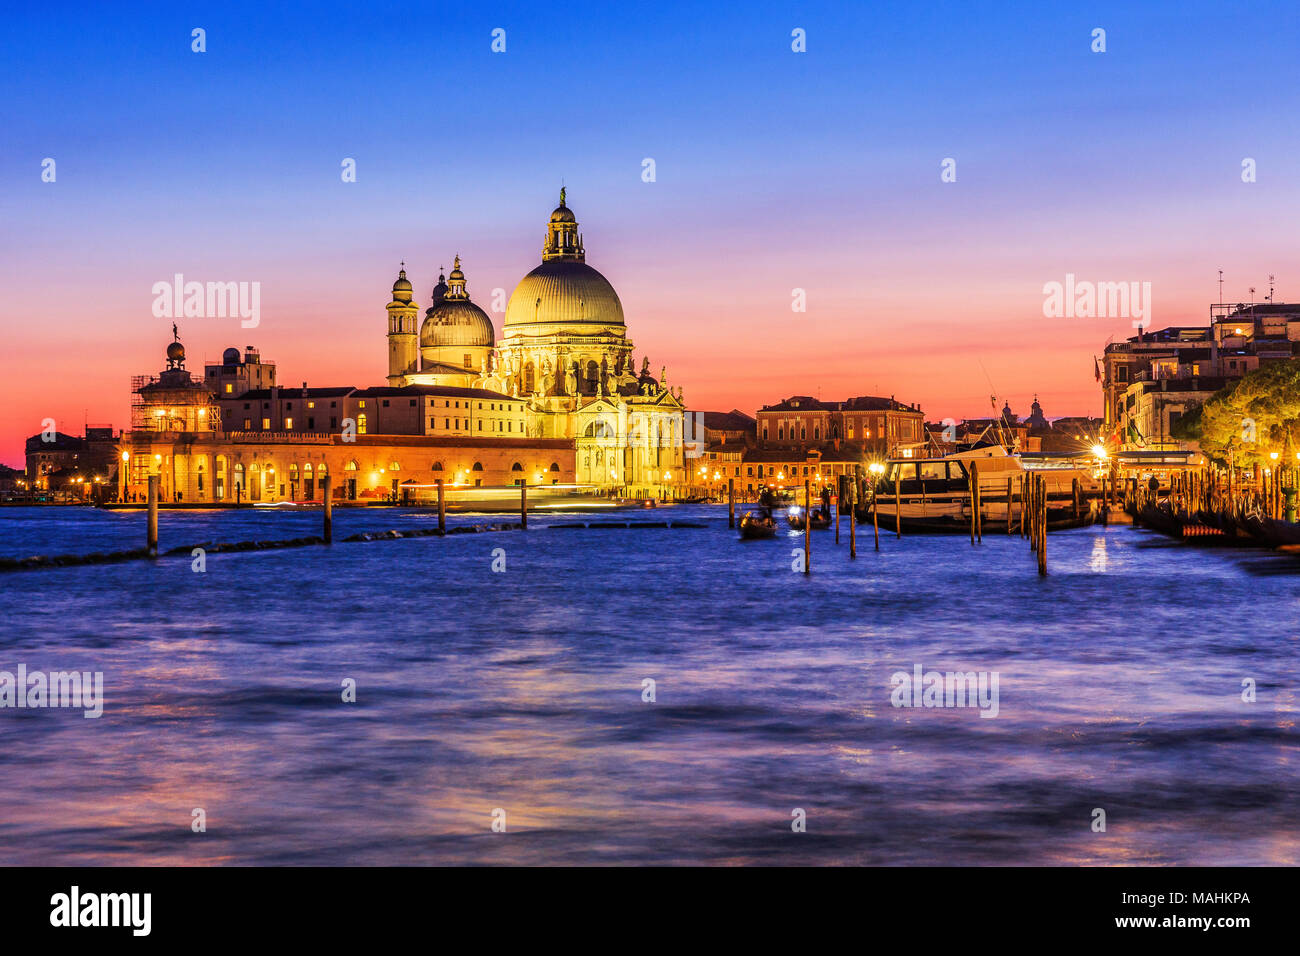 Venice, Italy. View of the Grand Canal in Venice at sunset. Stock Photo